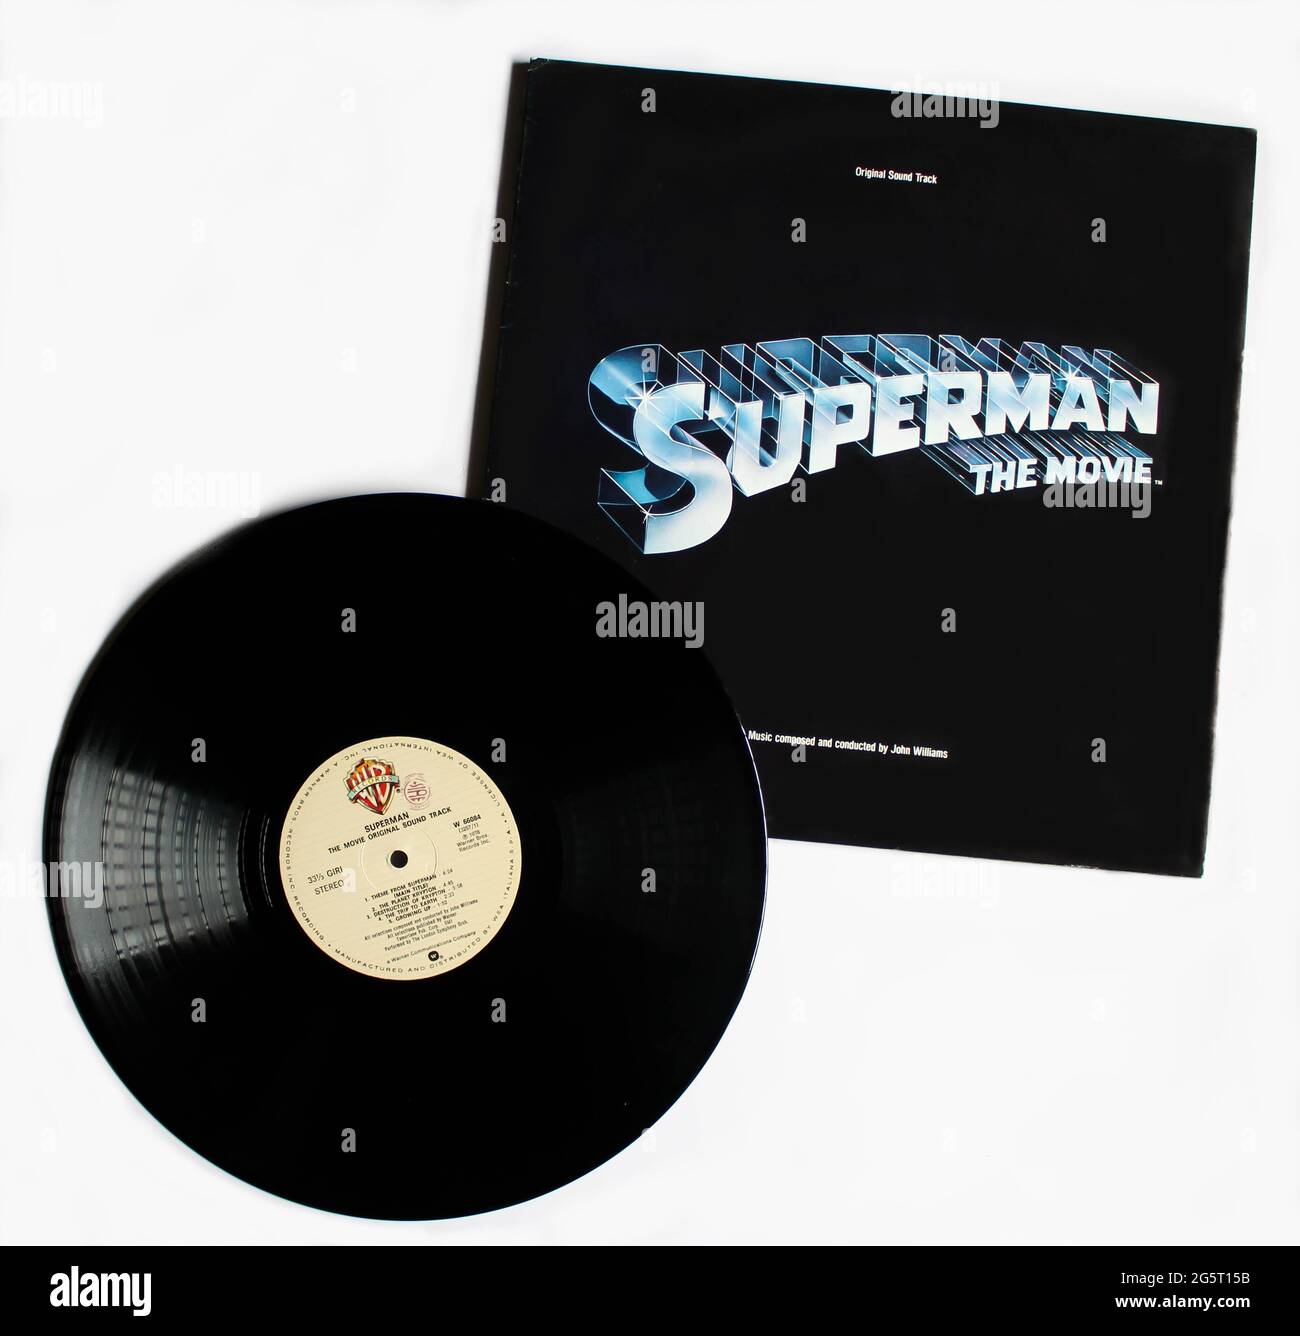 Superman The Movie Original Motion Picture Soundtrack on vinyl record LP disc album. Warner Brothers Records. Music by John Williams album cover Stock Photo